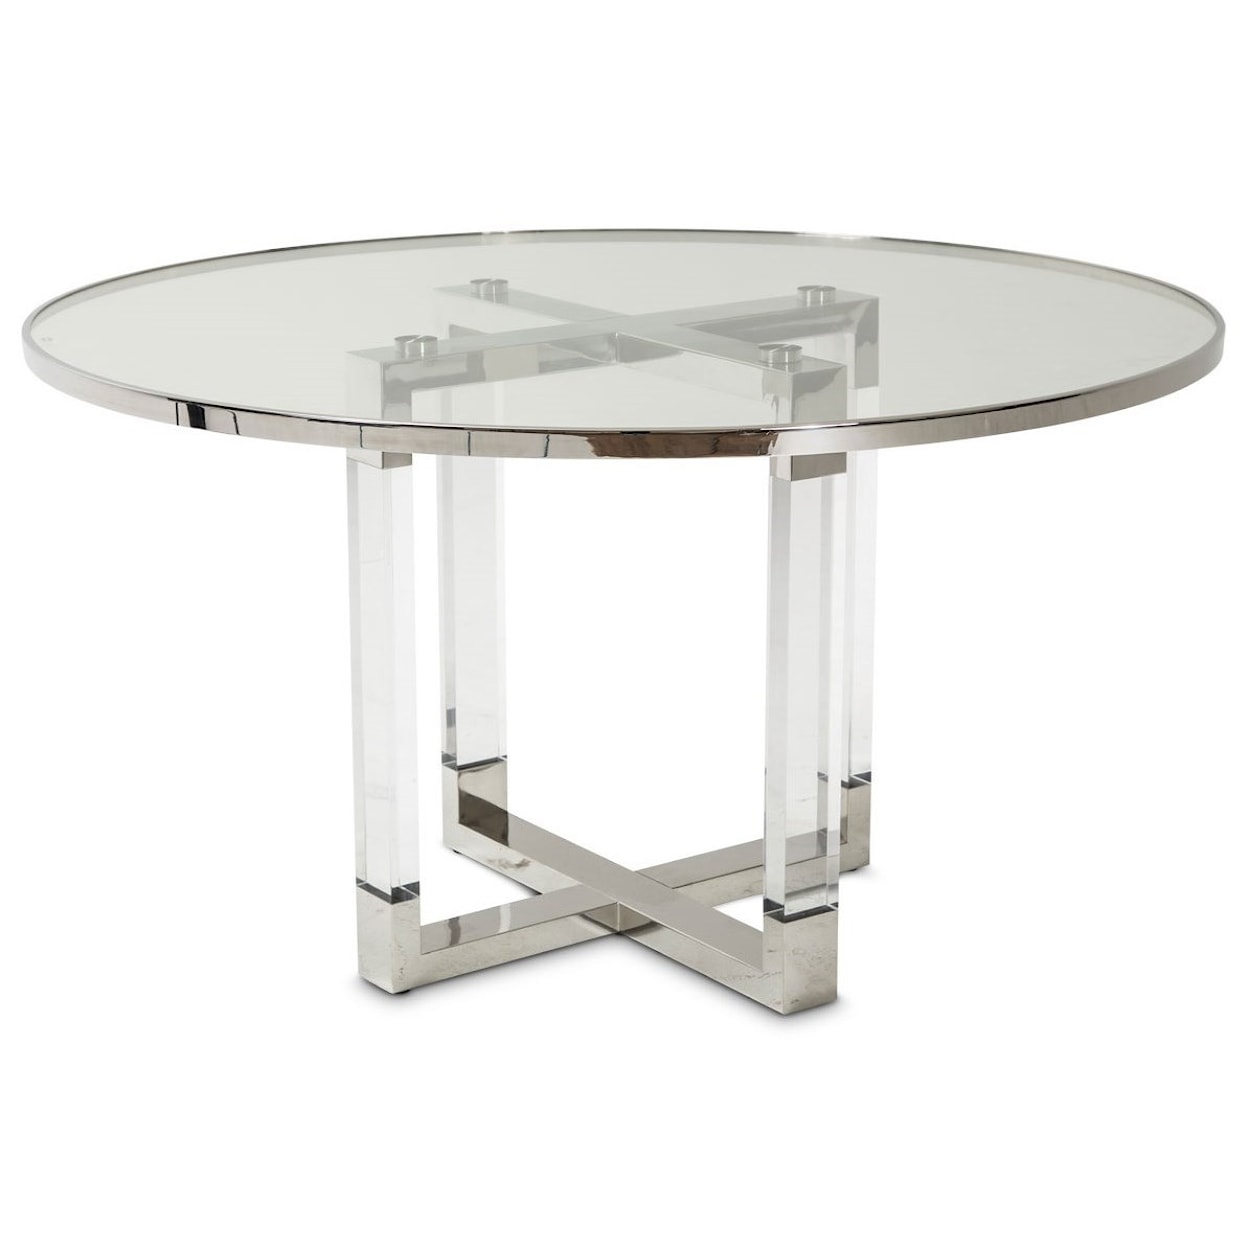 Michael Amini State St. Round Dining Table